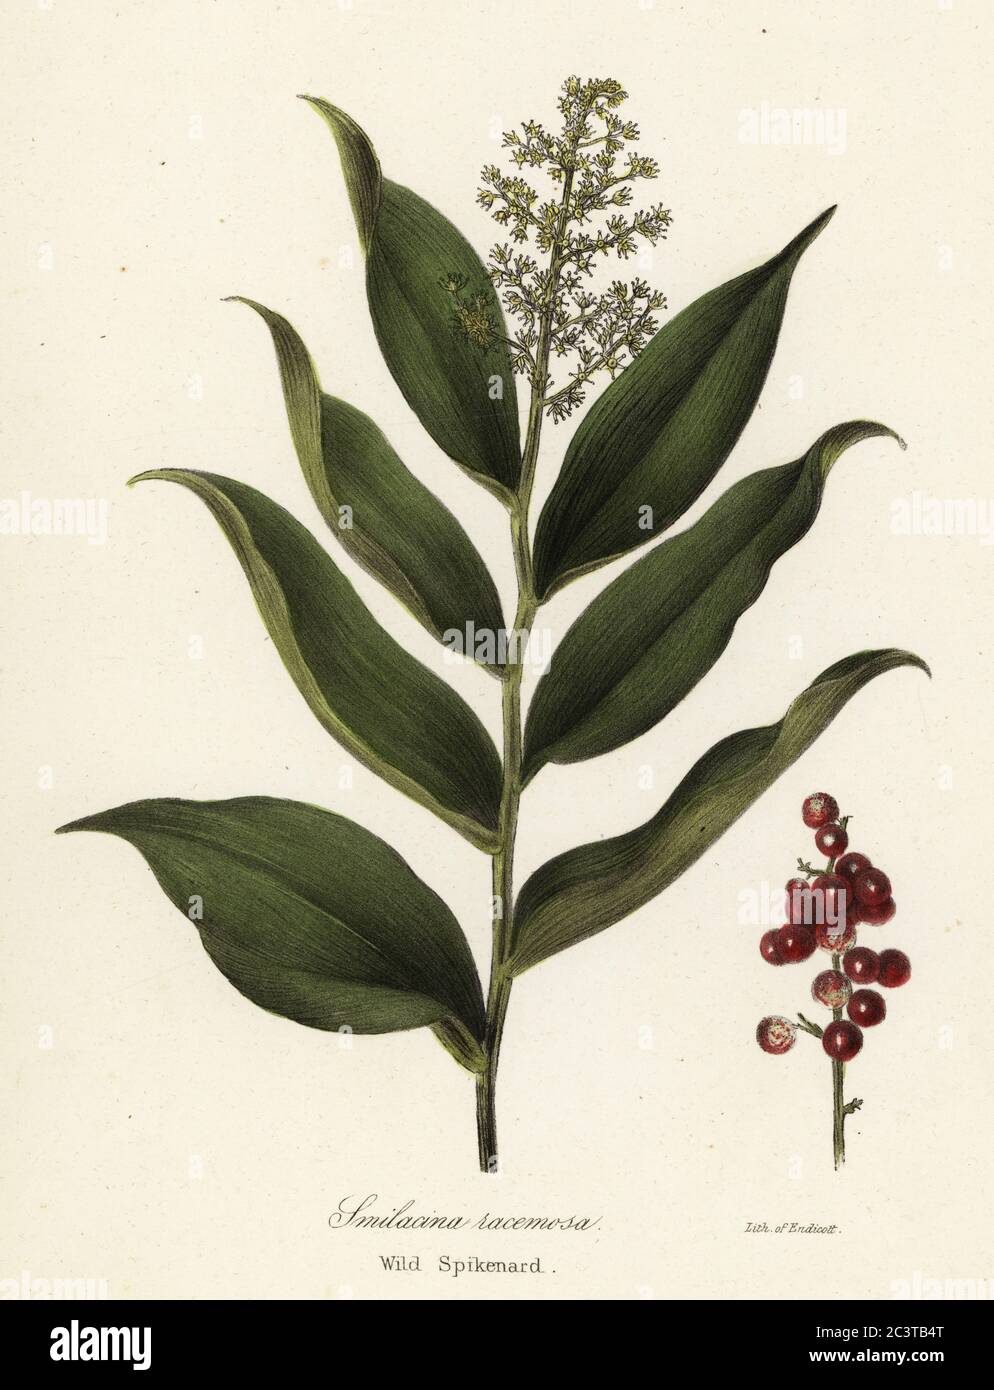 Treacleberry, Maianthemum racemosum (Wild spikenard, Smilacina racemosa). Handcoloured lithograph by Endicott after a botanical illustration from John Torrey’s A Flora of the State of New York, Carroll and Cook, Albany, 1843. The plates drawn by John Torrey, Agnes Mitchell, Elizabeth Paoley and Swinton. John Torrey was an American botanist, chemist and physician 1796-1873. Stock Photo